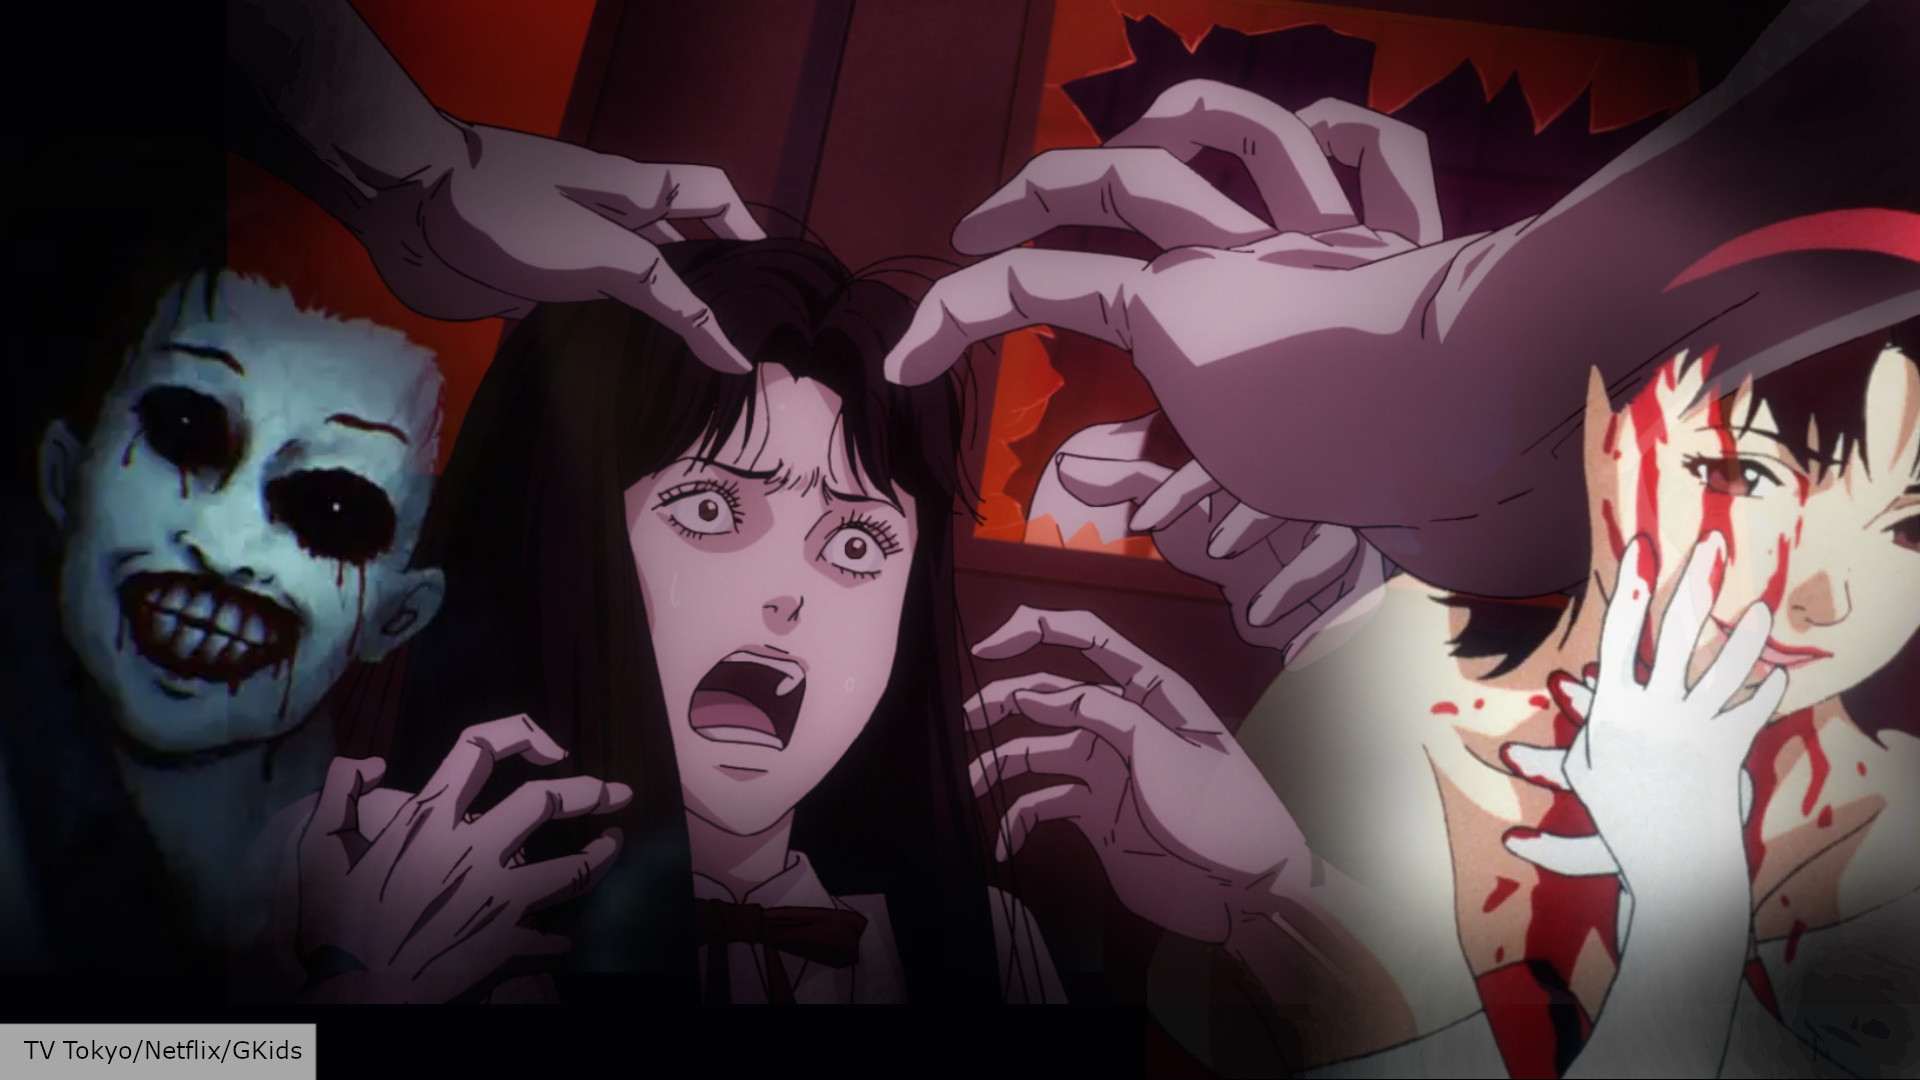 Can Horror Anime Ever Be As Scary as Live Action? - I drink and